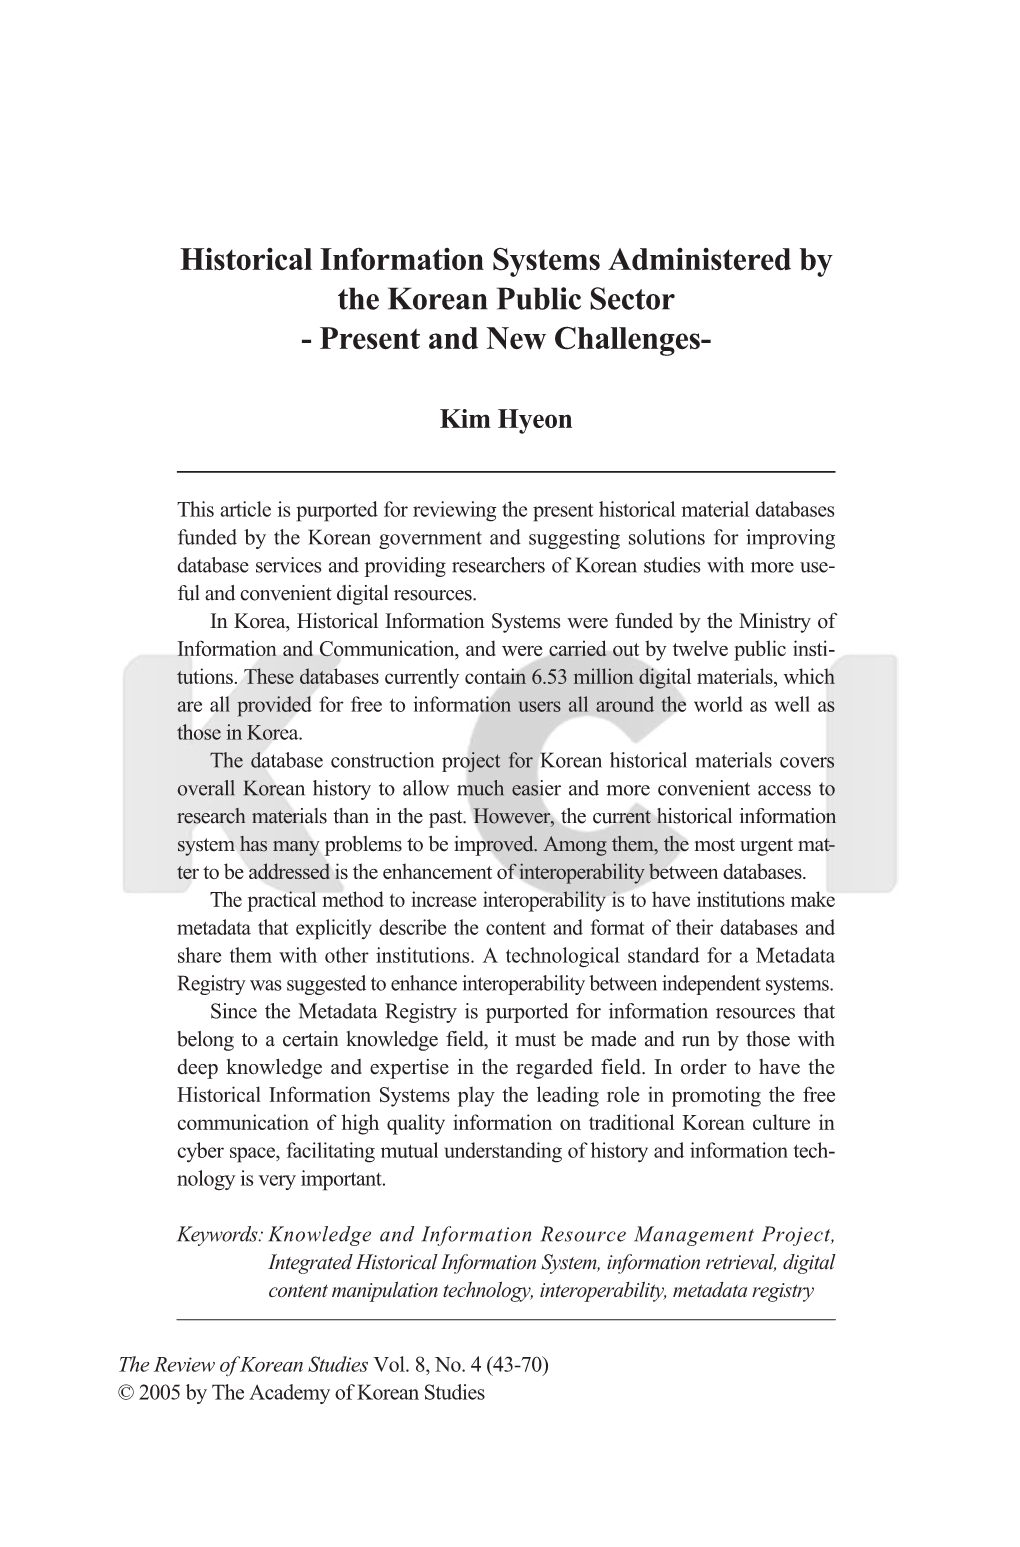 Historical Information Systems Administered by the Korean Public Sector - Present and New Challenges